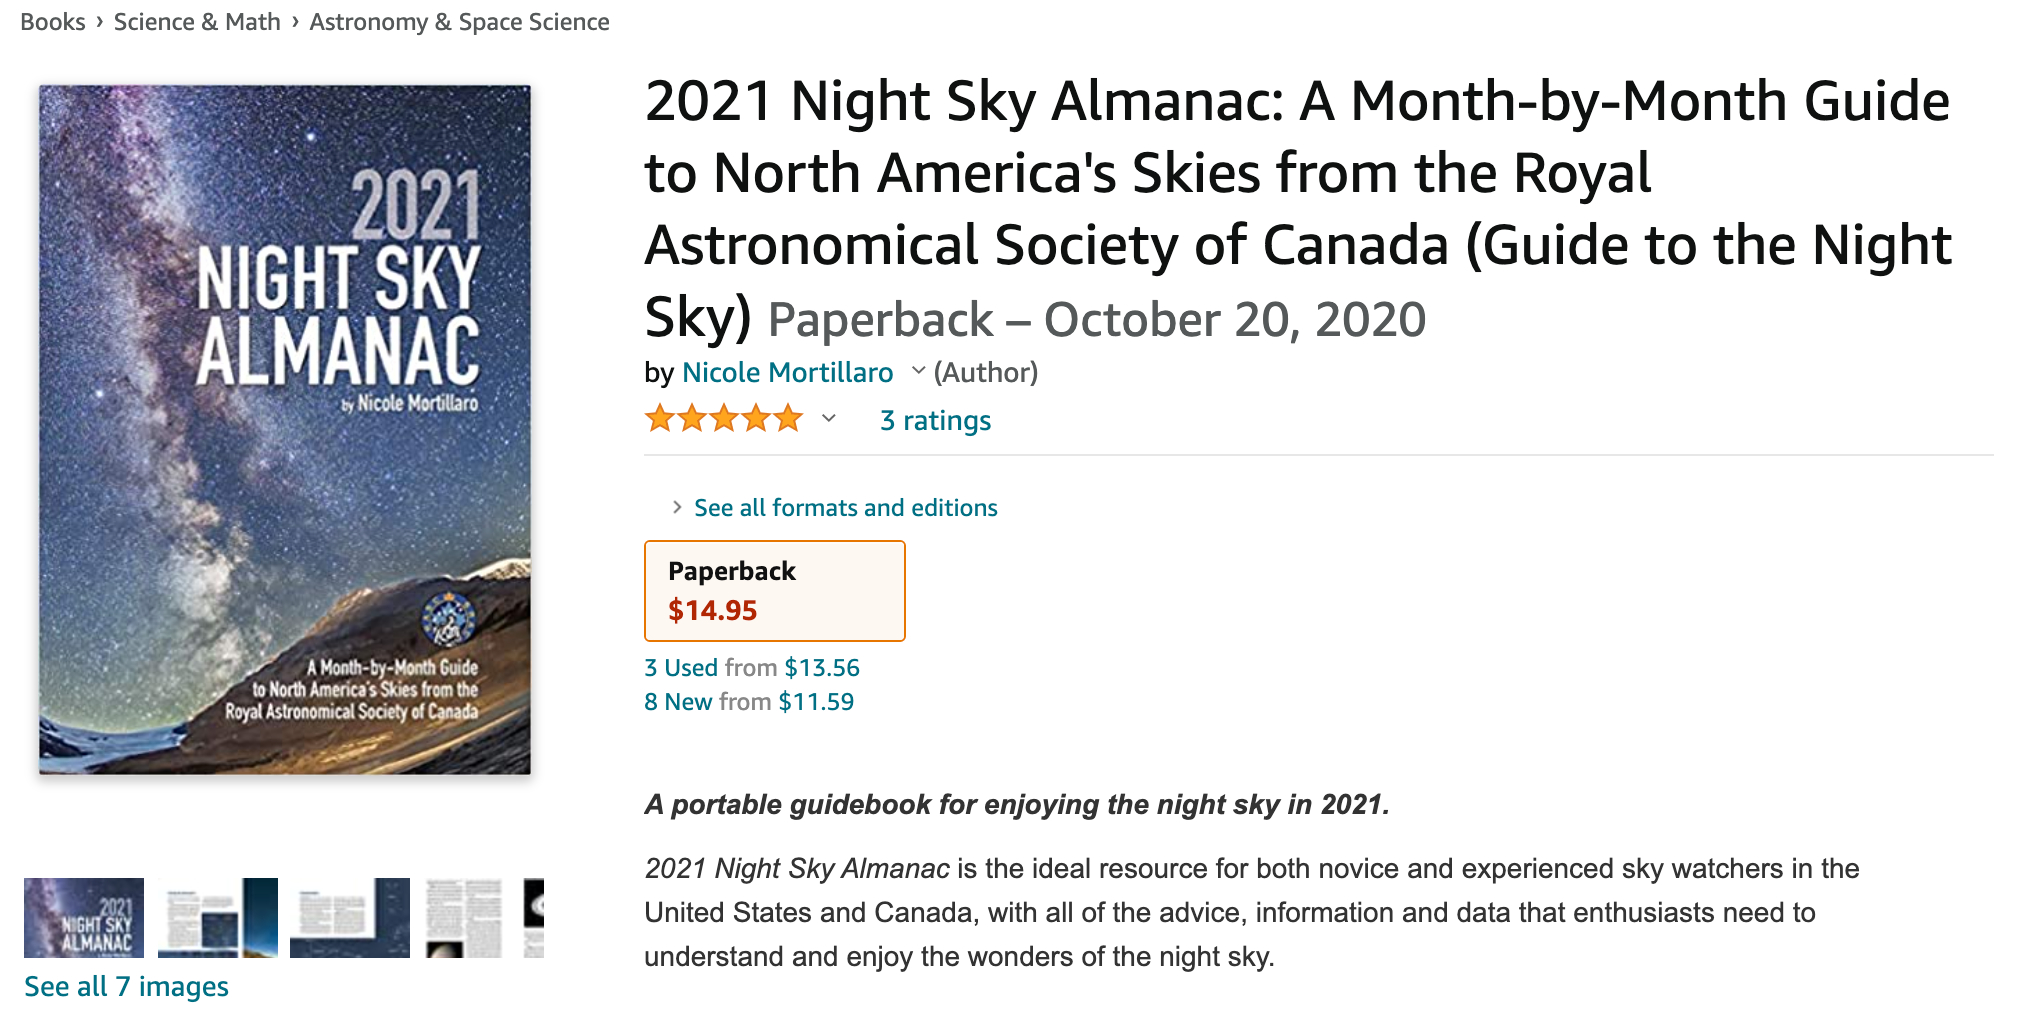 2021 Night Sky Almanac- A Month-by-Month Guide to North America's Skies from the Royal Astronomical Society of Canada (Guide to the Night Sky).jpg